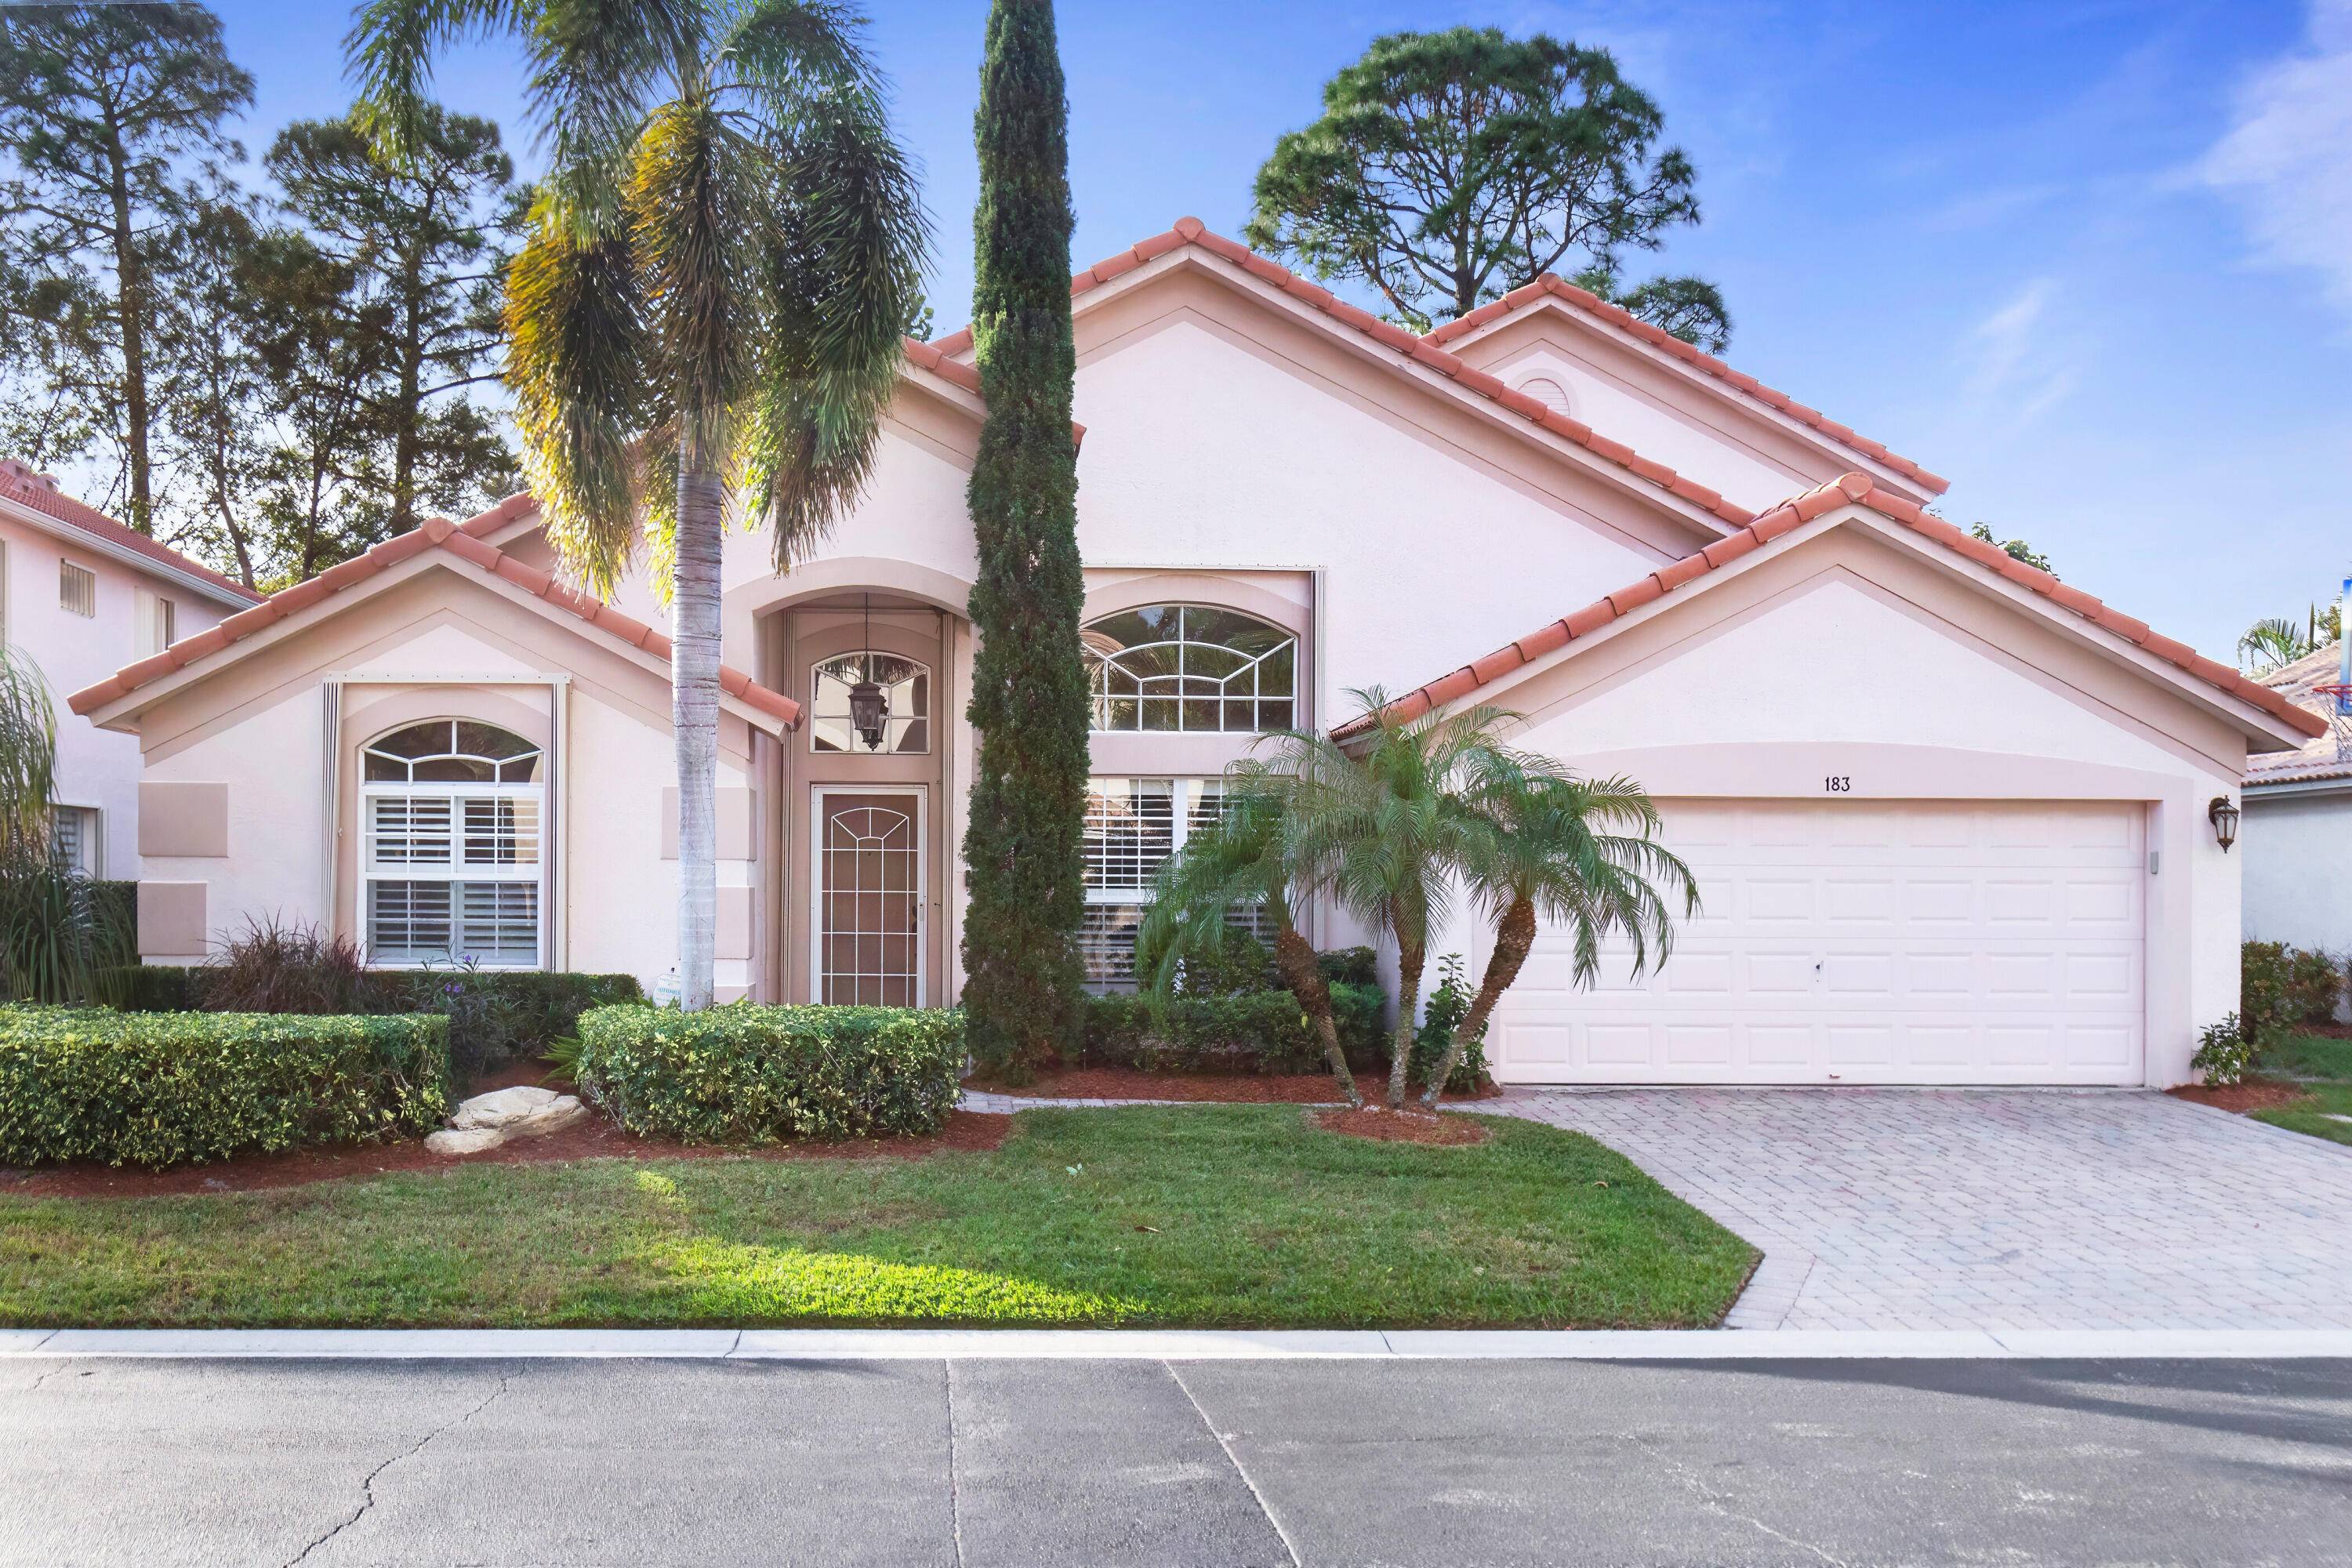 This peaceful family friendly, gated community is located in the heart of Palm Beach Gardens, in between I95 and Florida's turnpike.